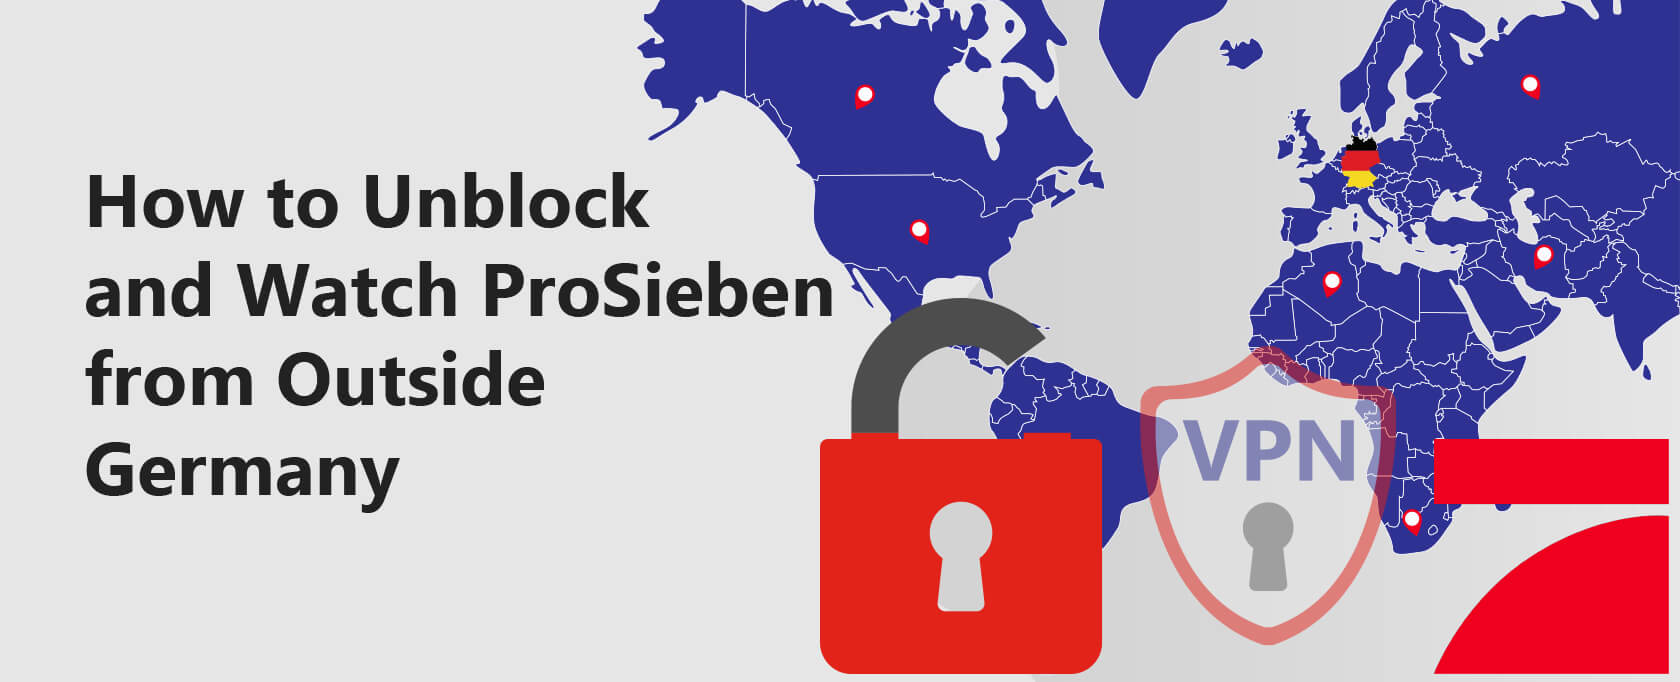 How to Unblock and Watch ProSieben from Outside Germany